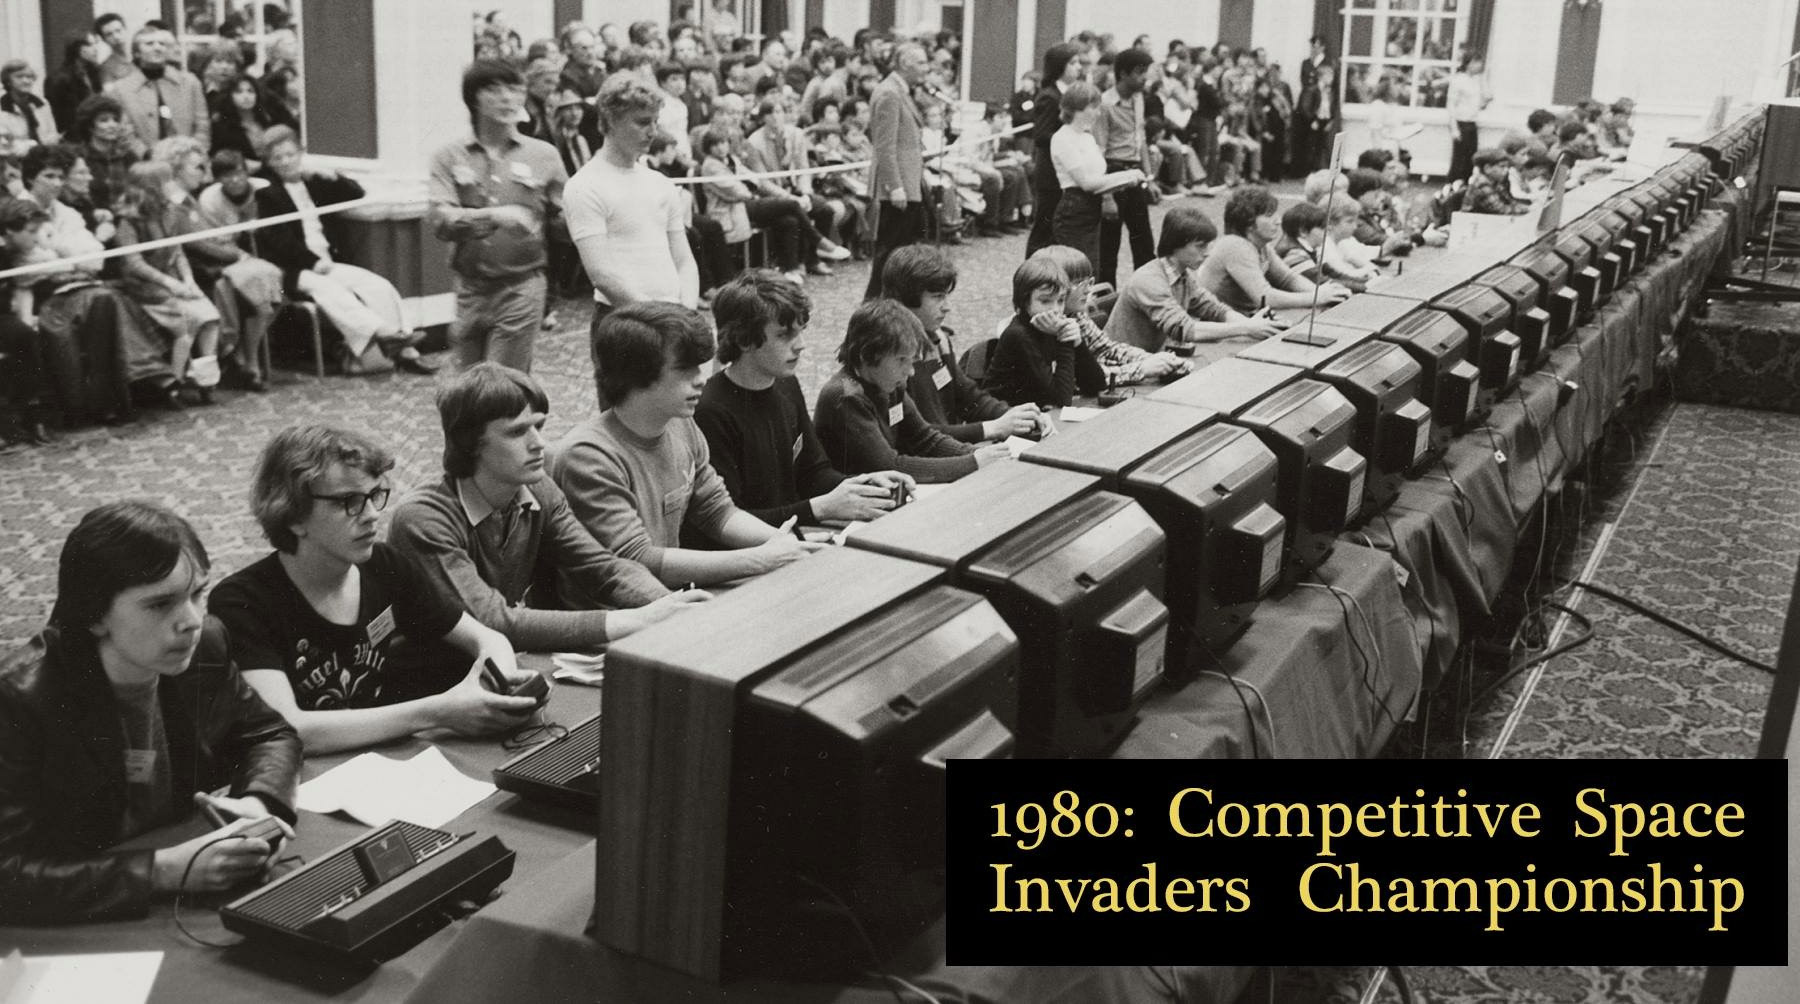 atari space invaders tournament - 1980 Competitive Space Invaders Championship